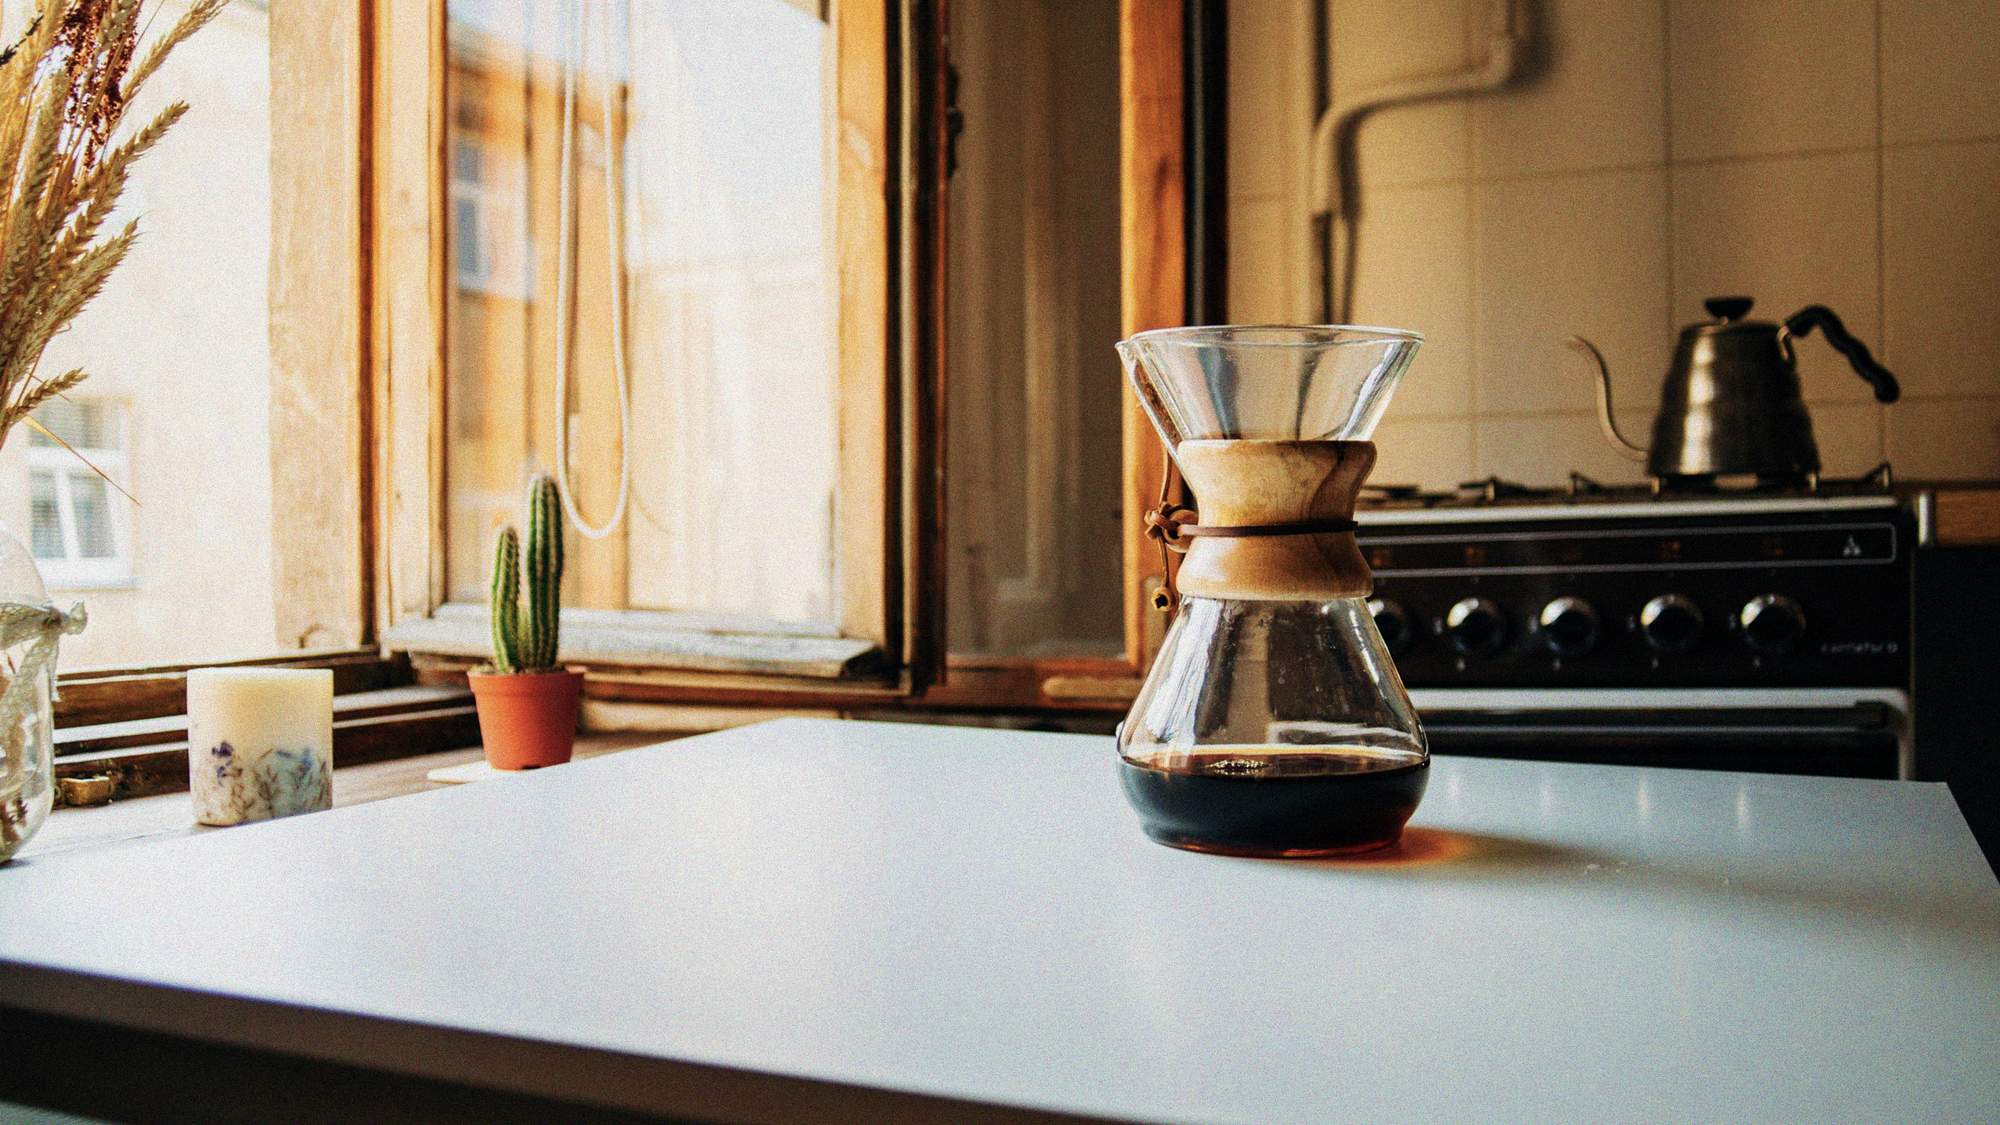 Our Favourite Brewing Methods - Chemex